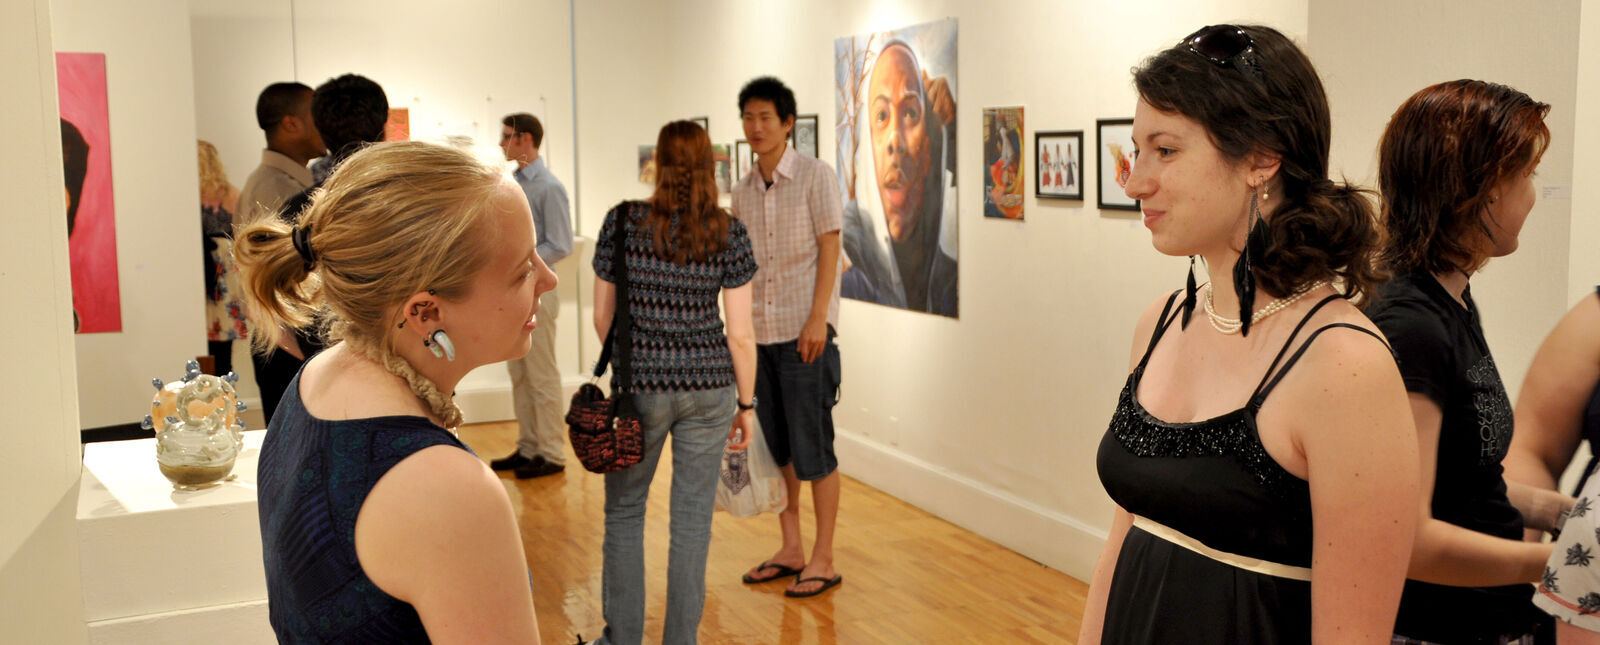 Two female students chat during an art show in the George Waters Gallery